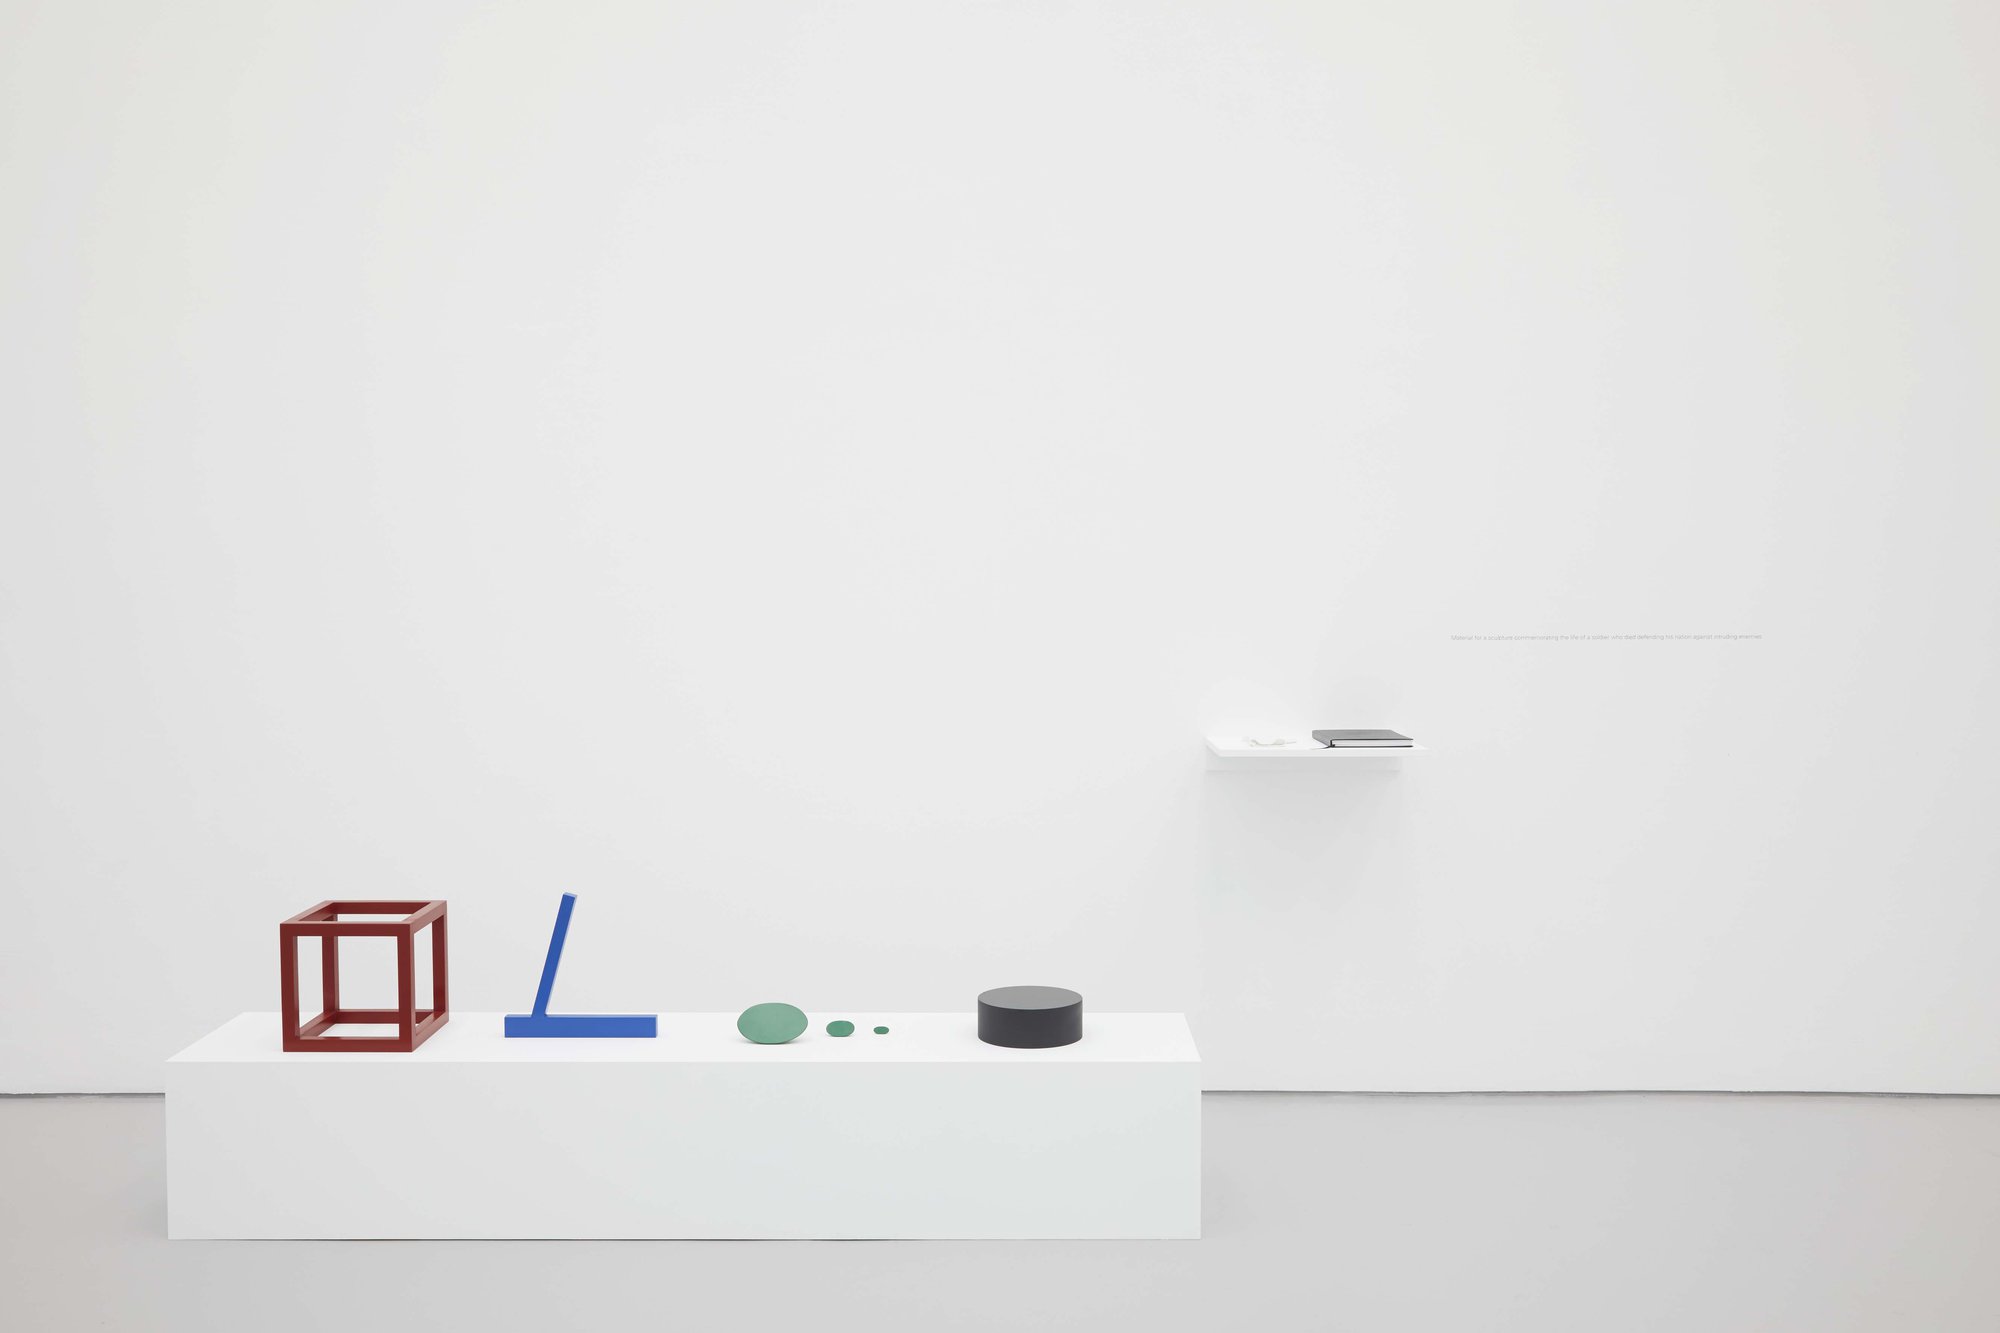 Iman Issa, Material for a sculpture commemorating the life of a soldier who died defending his nation against intruding enemies, four painted wooden sculptures, painted wooden plinth, painted wooden shelf, blank book with four inserts, vinyl text on wall, dimensions variable, 2012